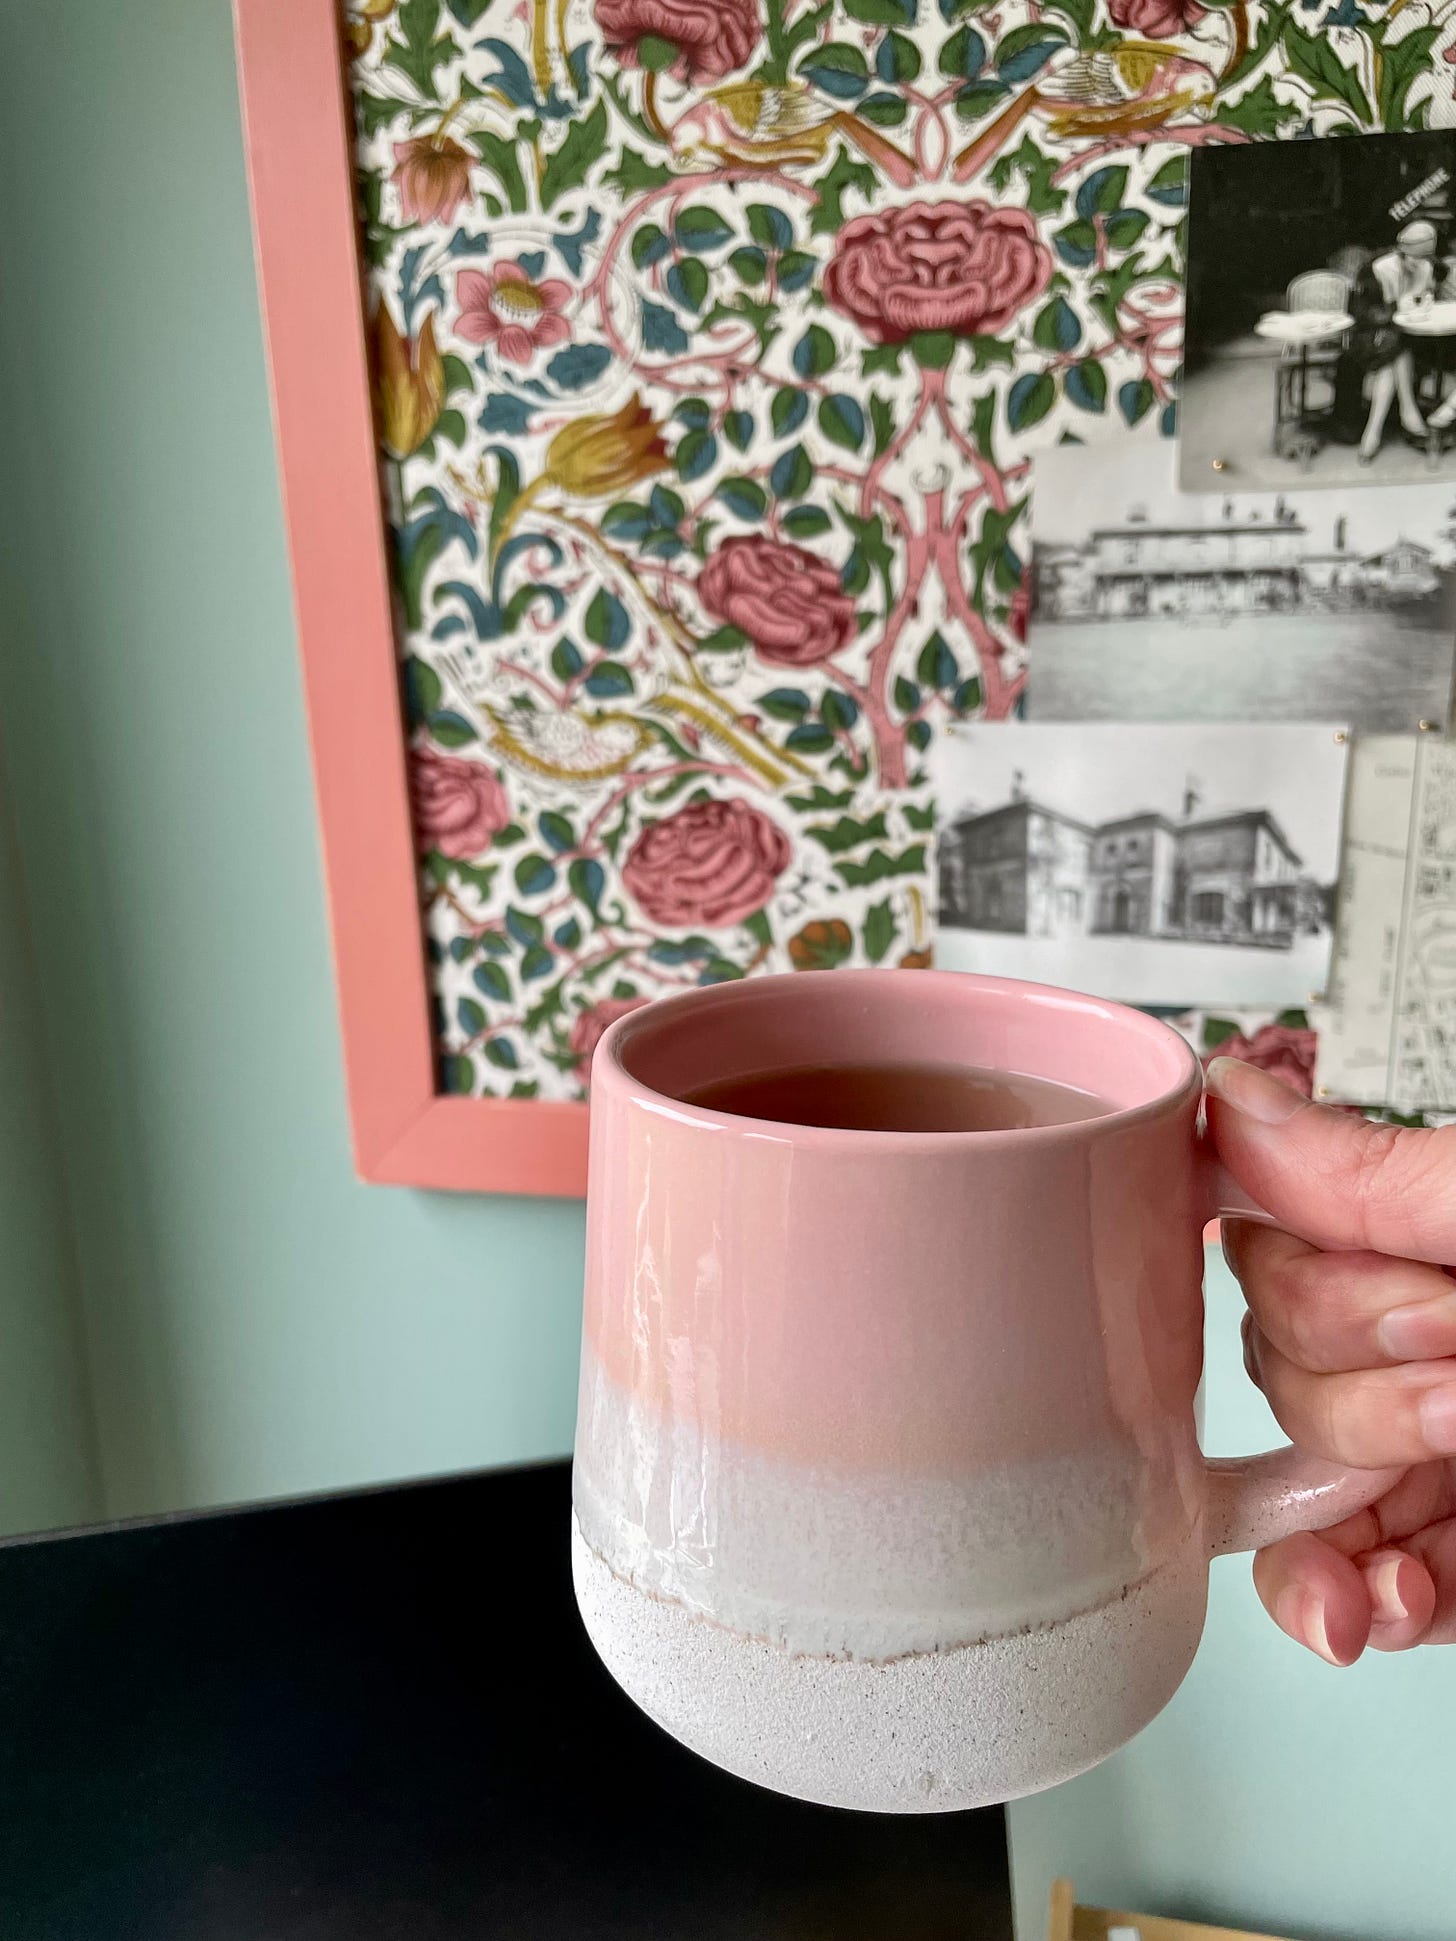 A pink mug held above my desk. Behind it you can see a monitor screen, the green walls and a floral pinboard. The pinboard has some black and white inspiration photographs on it, mainly of country houses.